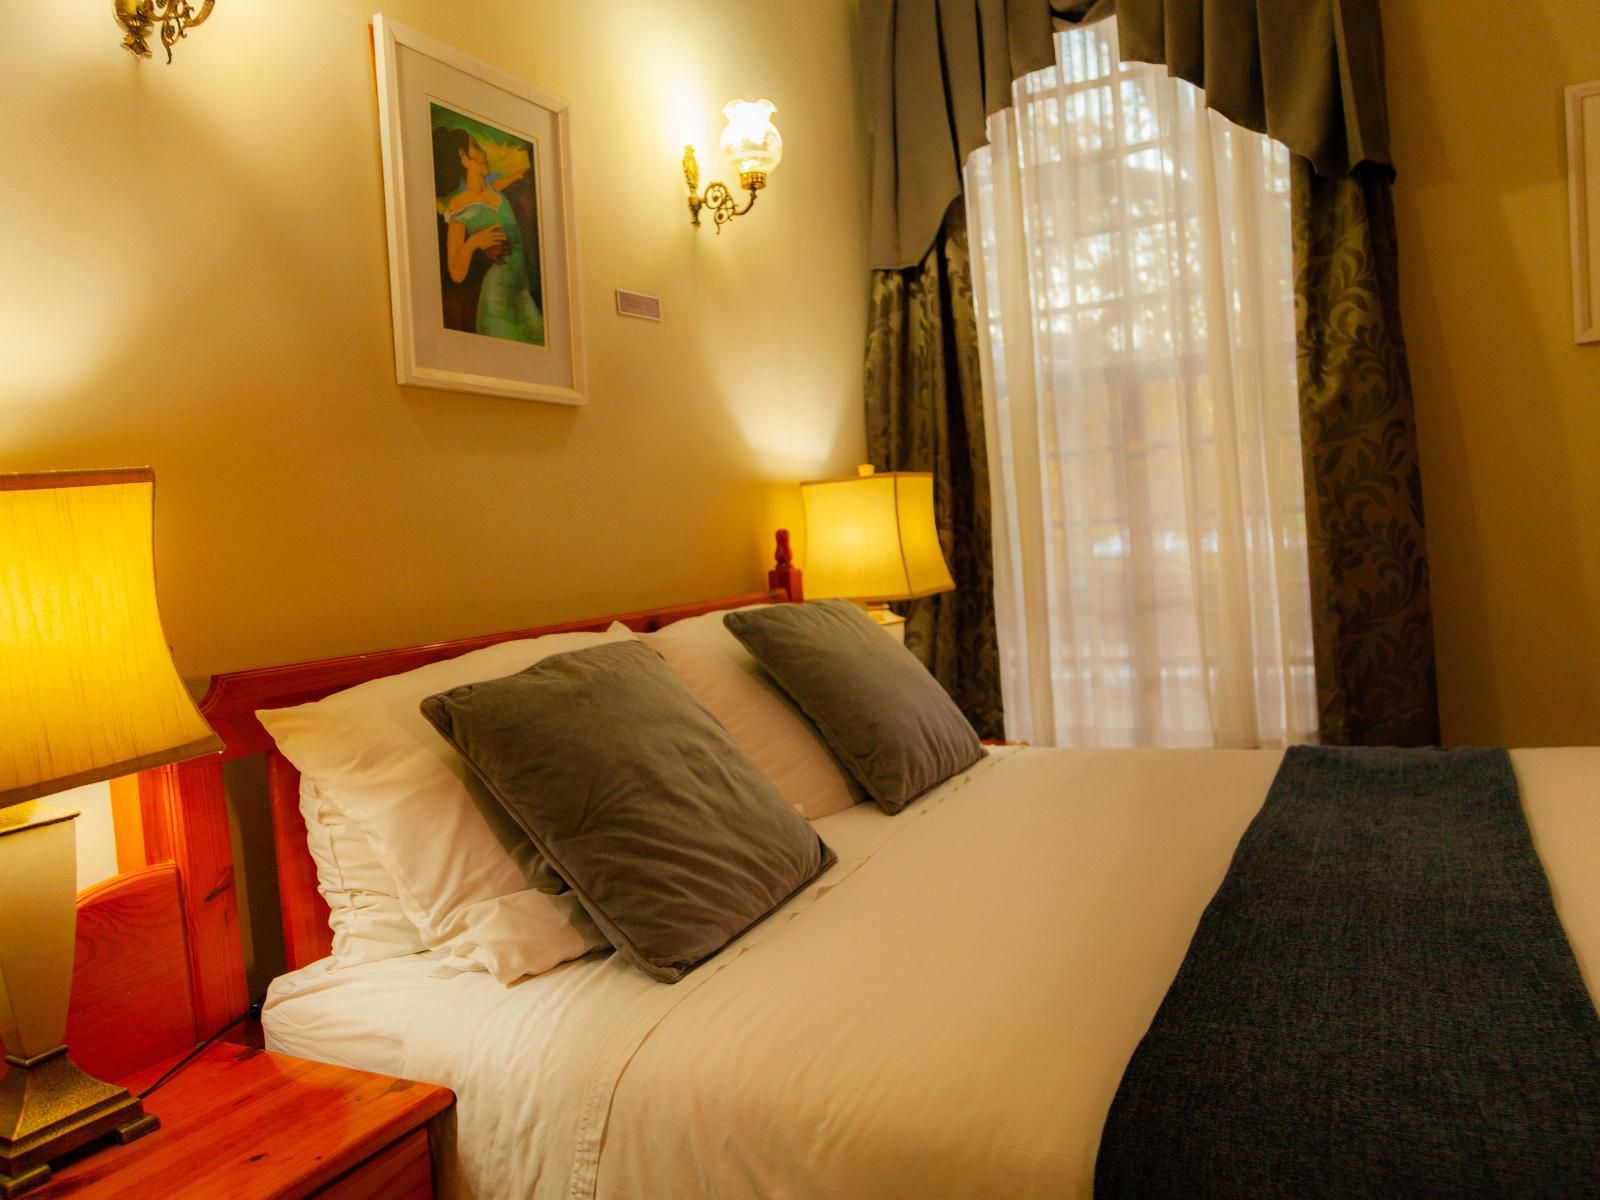 Constantia Guest Lodge And Spa Meyers Park Pretoria Tshwane Gauteng South Africa Colorful, Bedroom